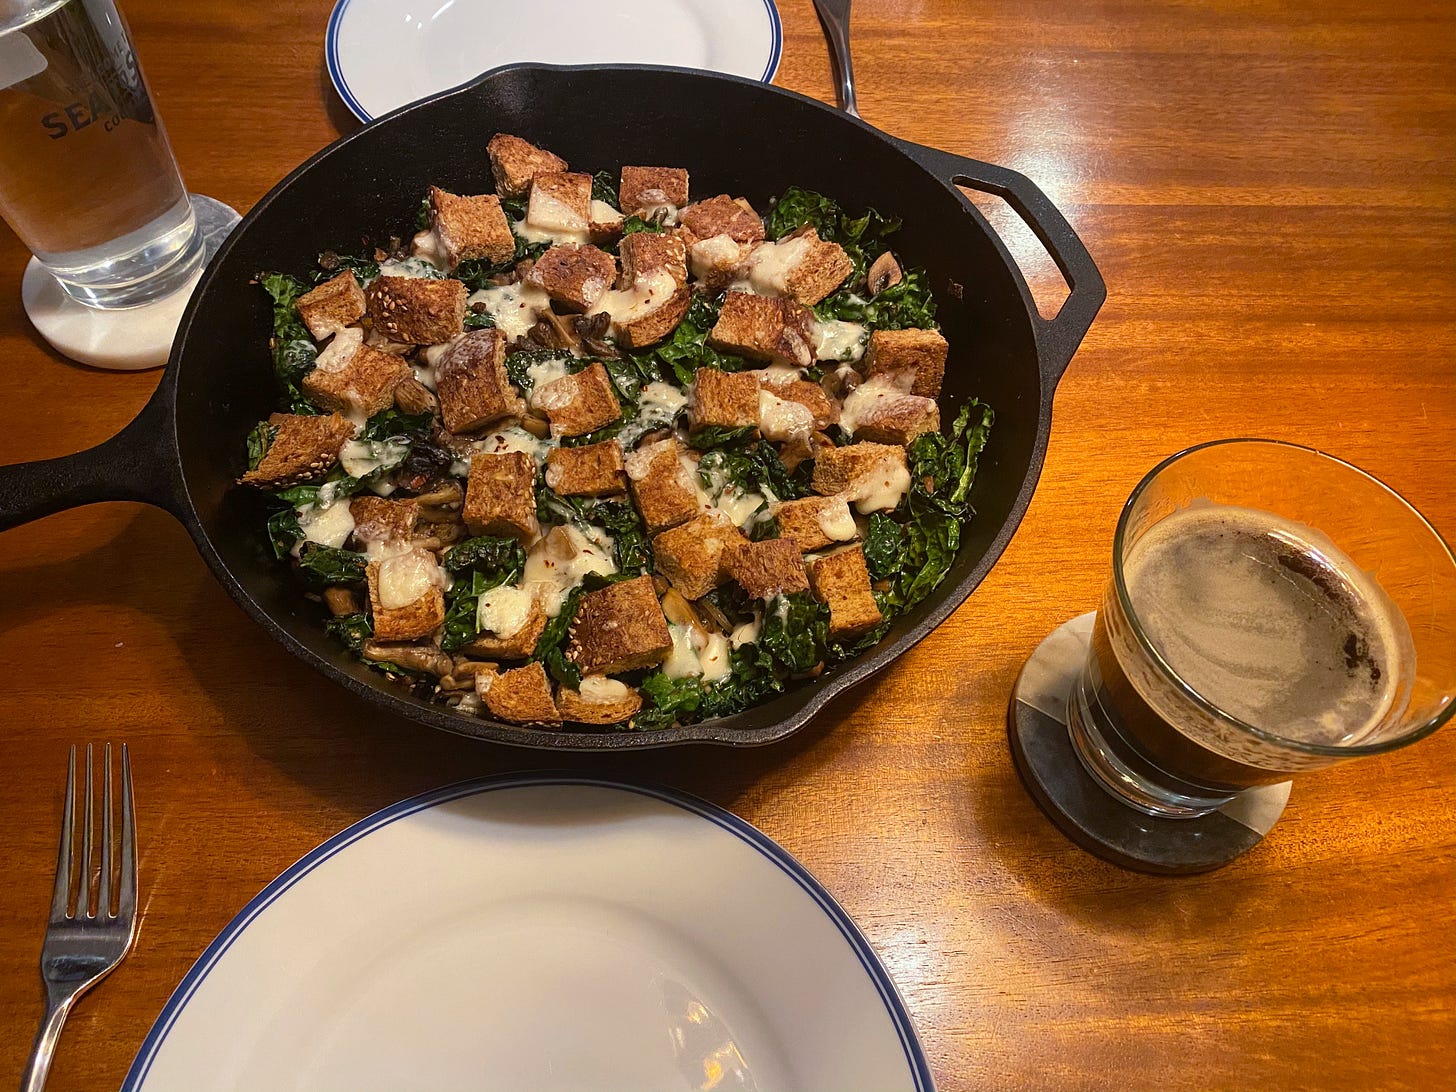 A large cast-iron pan full of kale and mushrooms with brown squares of toast and melted cheese on top. On either side of the pan is a white plate with a blue rim, and next to the plate in the foreground is a half-full glass of dark beer on top of a coaster.